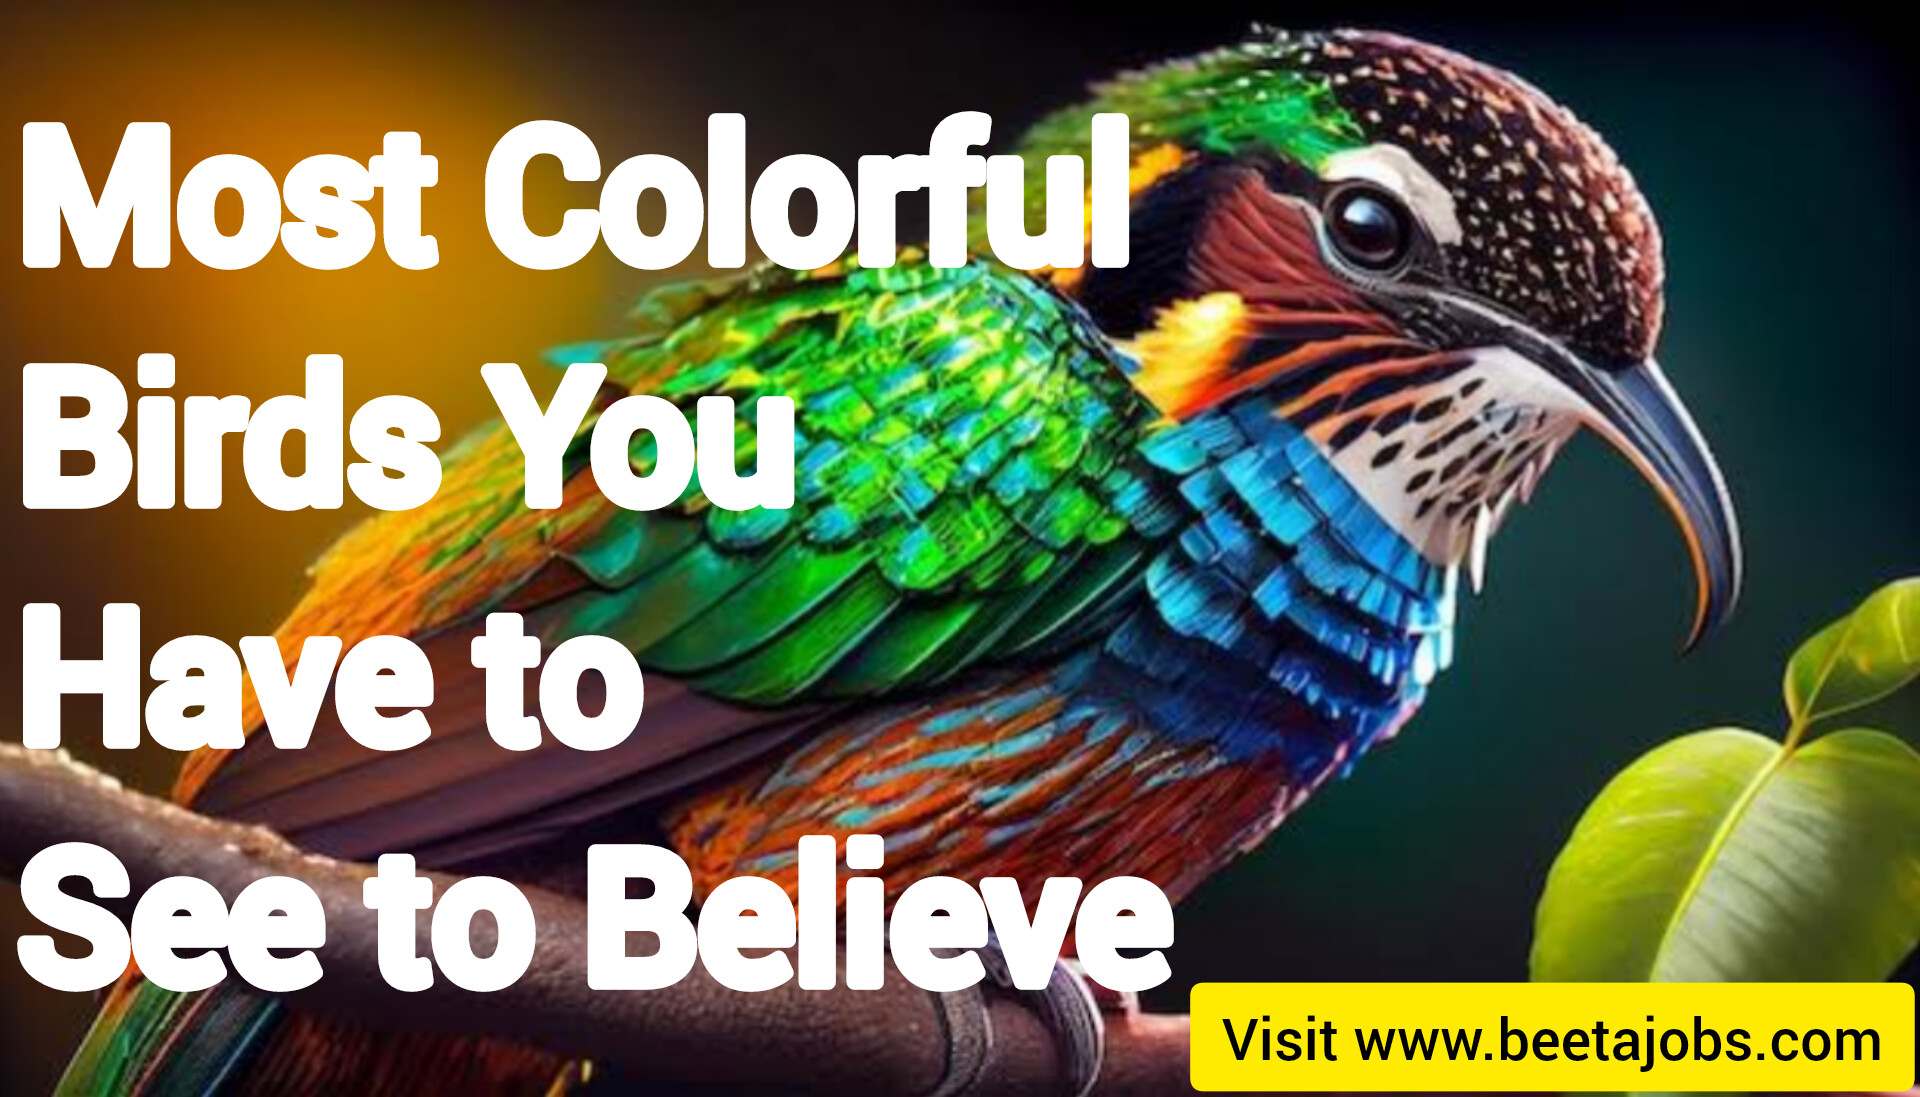 Most Colorful Birds You Have to See to Believe